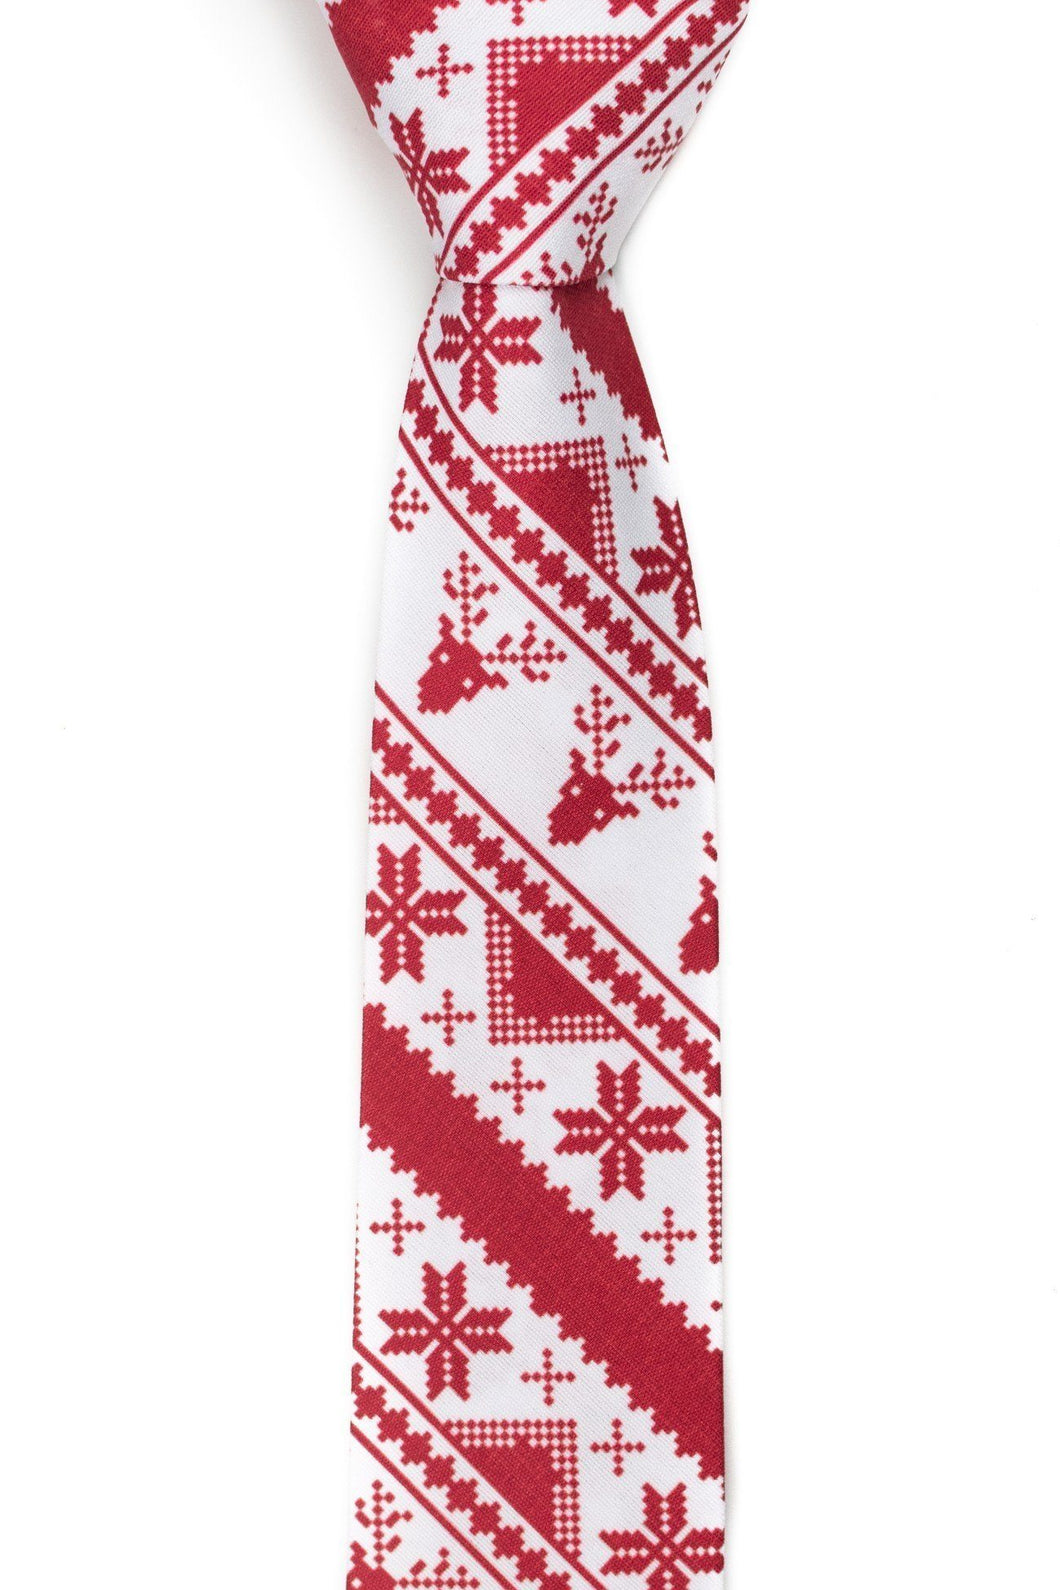 Rudolph’s Journey Red Ugly Christmas Sweater Tie - Missionary Tie